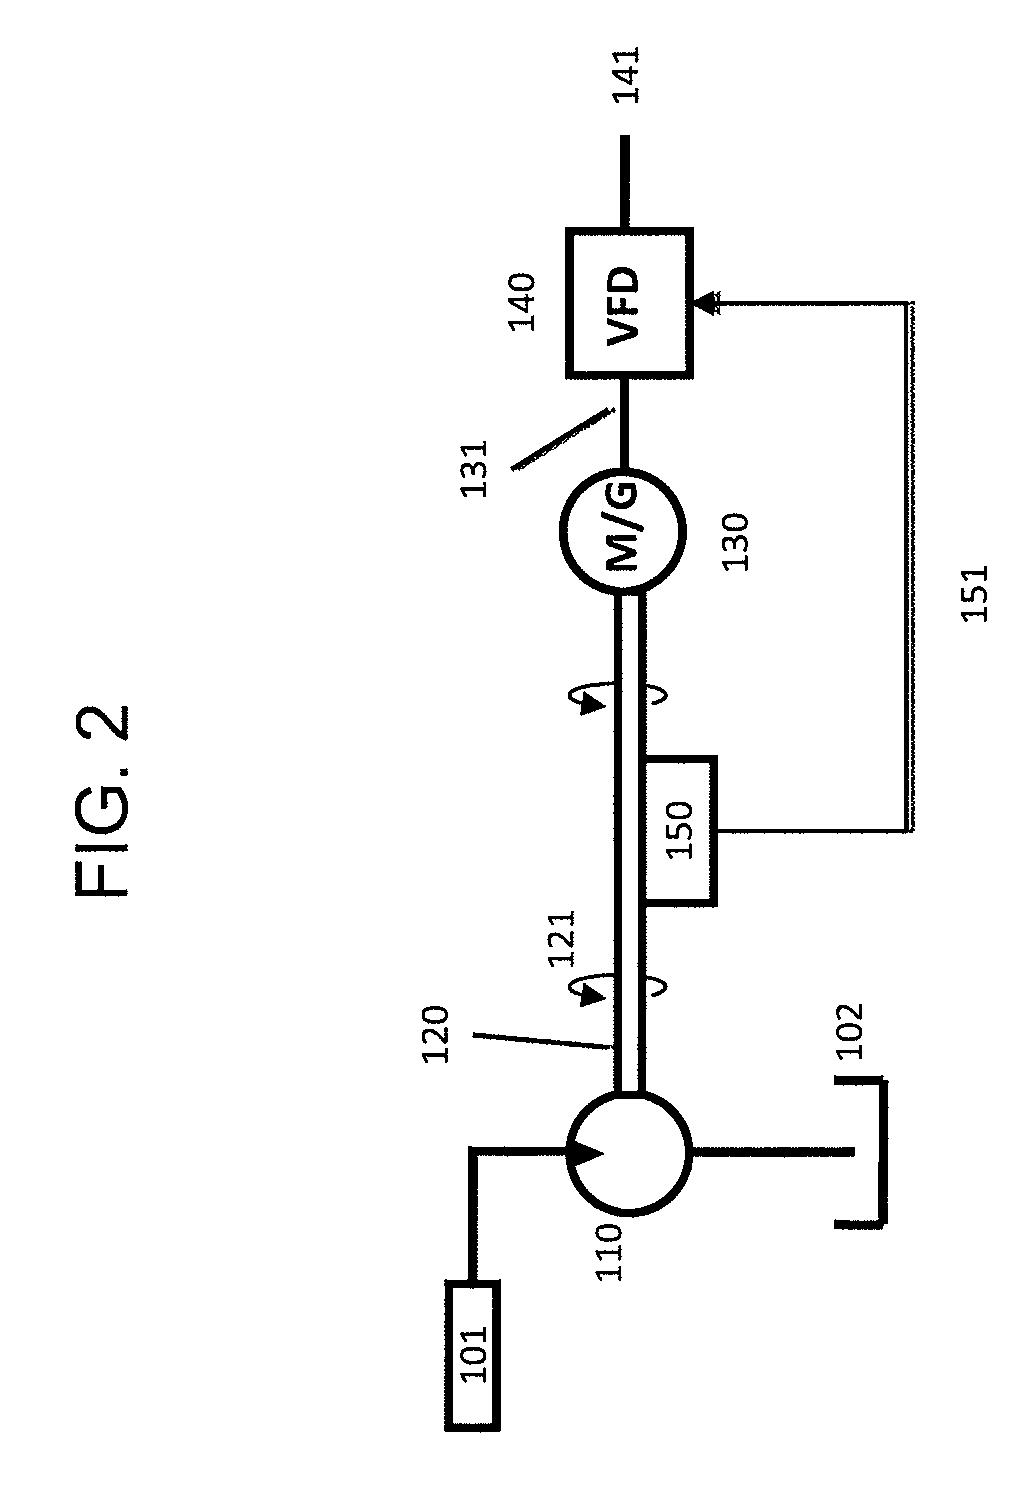 Systems and methods for improving drivetrain efficiency for compressed gas energy storage